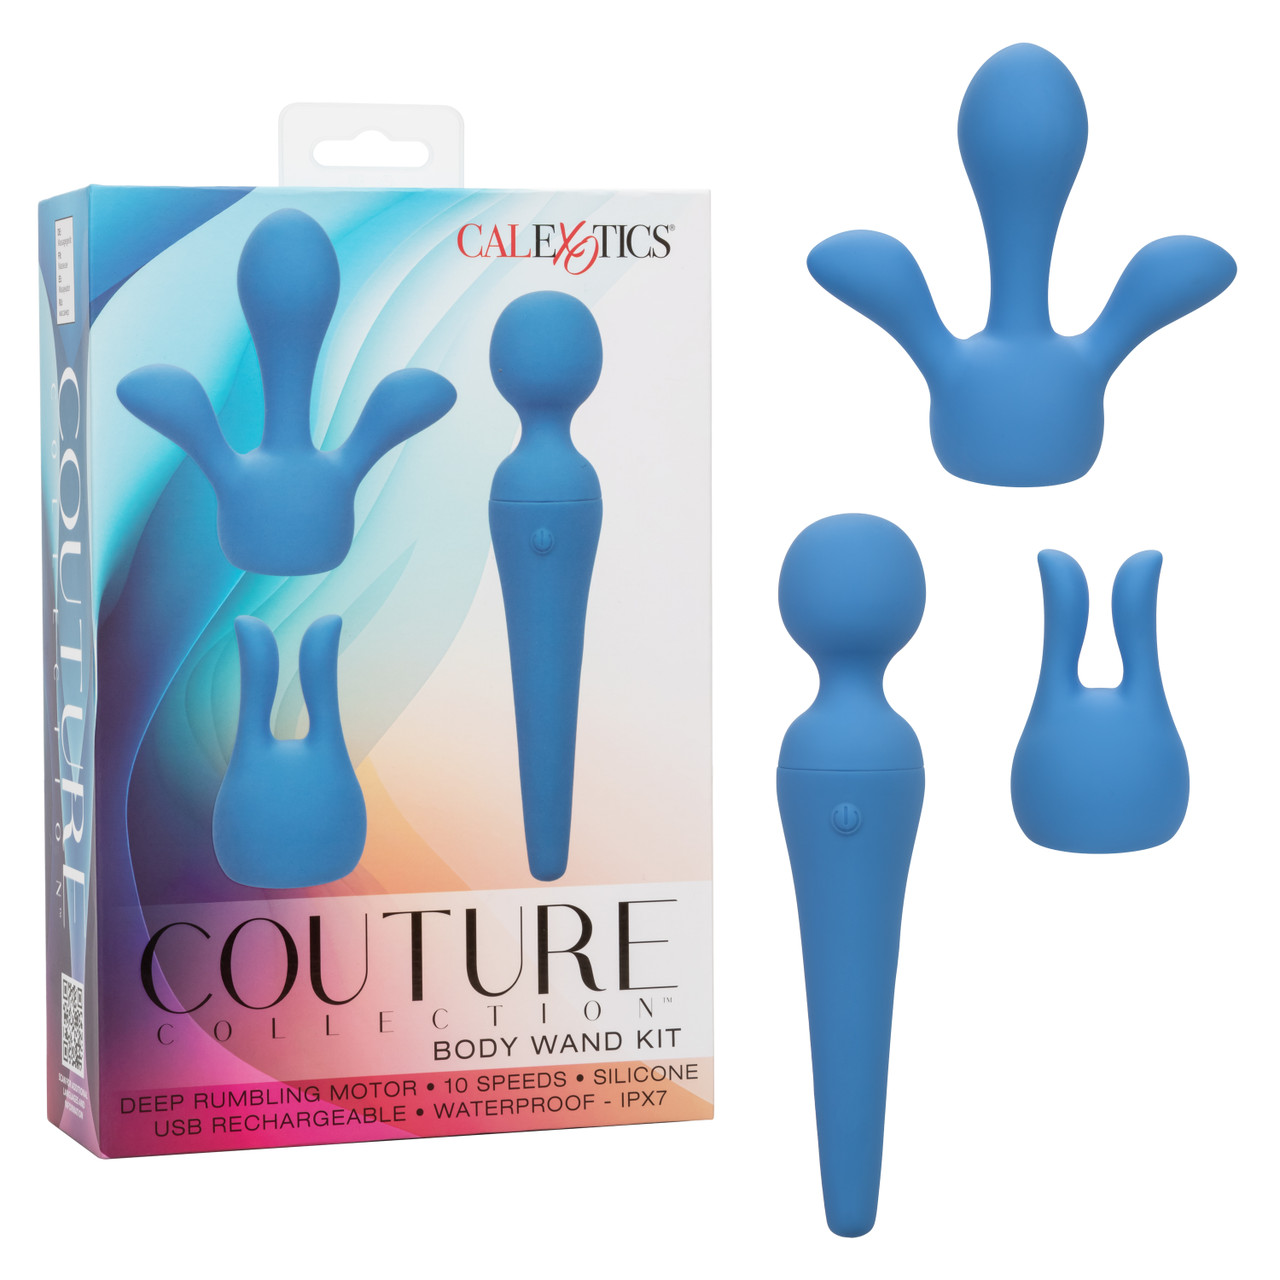 COUTURE COLLECTION BODY WAND KIT - Click Image to Close